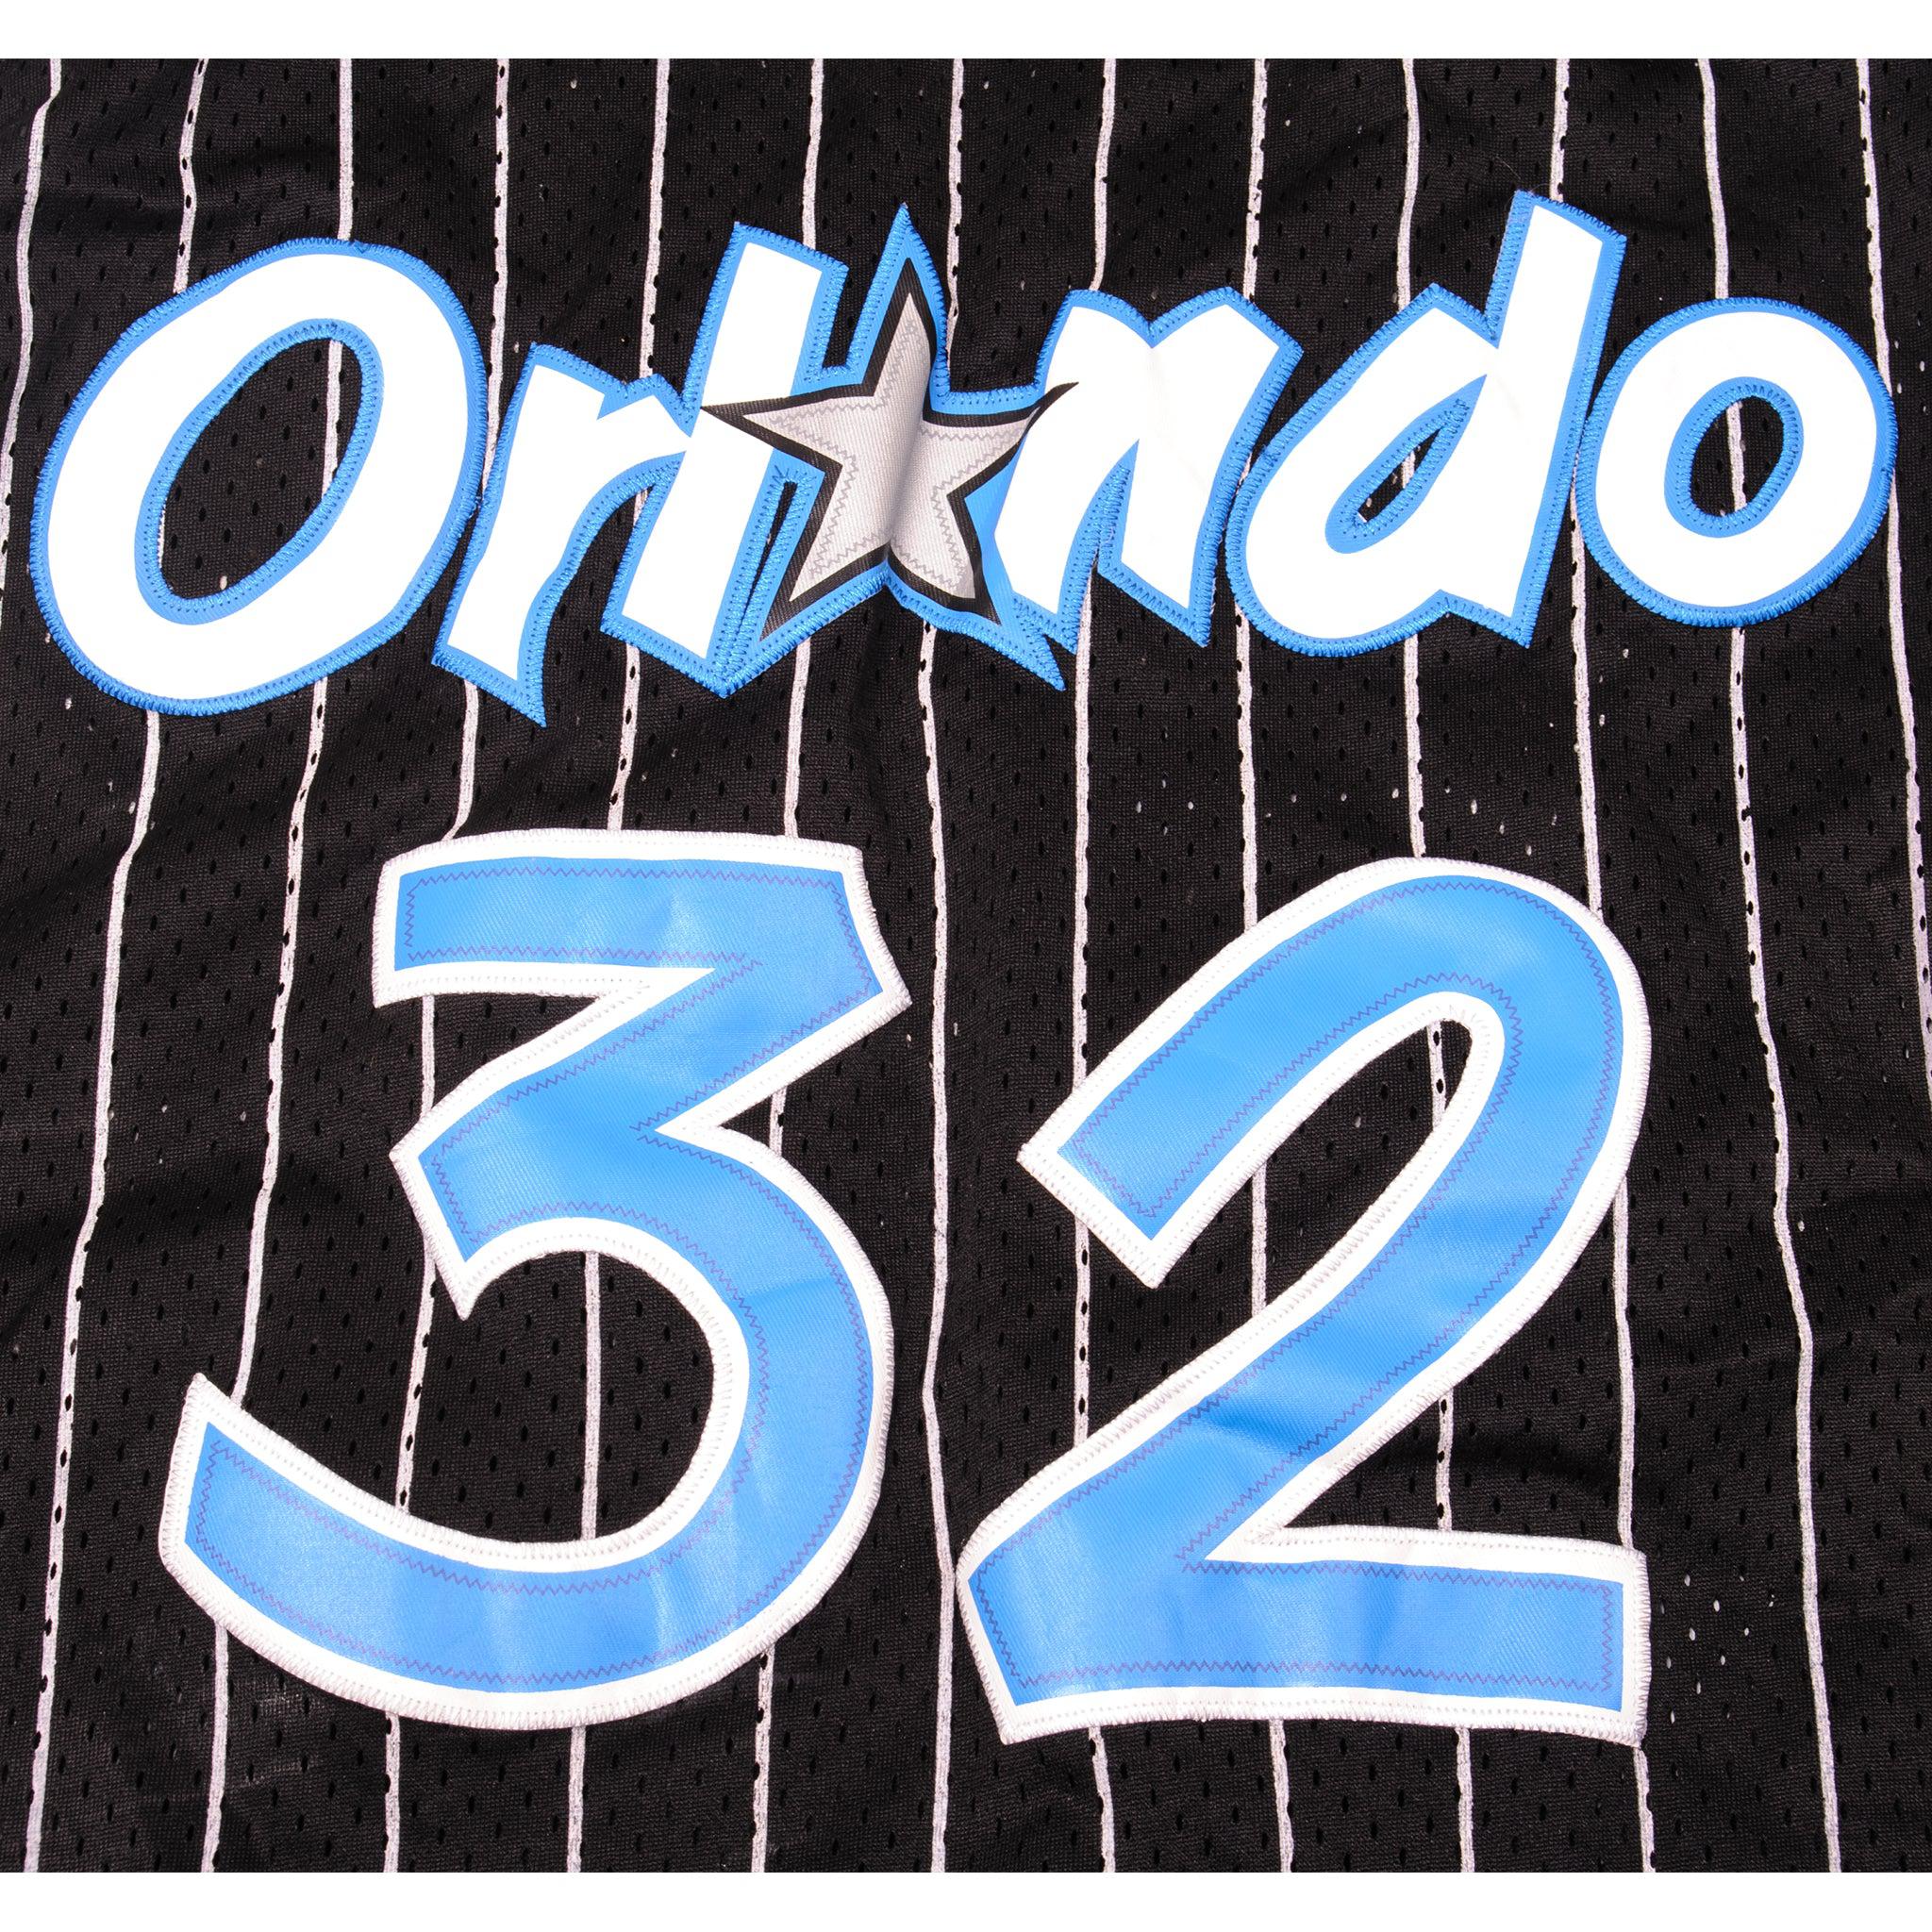 Vintage Nike NBA Orlando Magic Shaquille O'Neal #32 Jersey Size XL 1990s